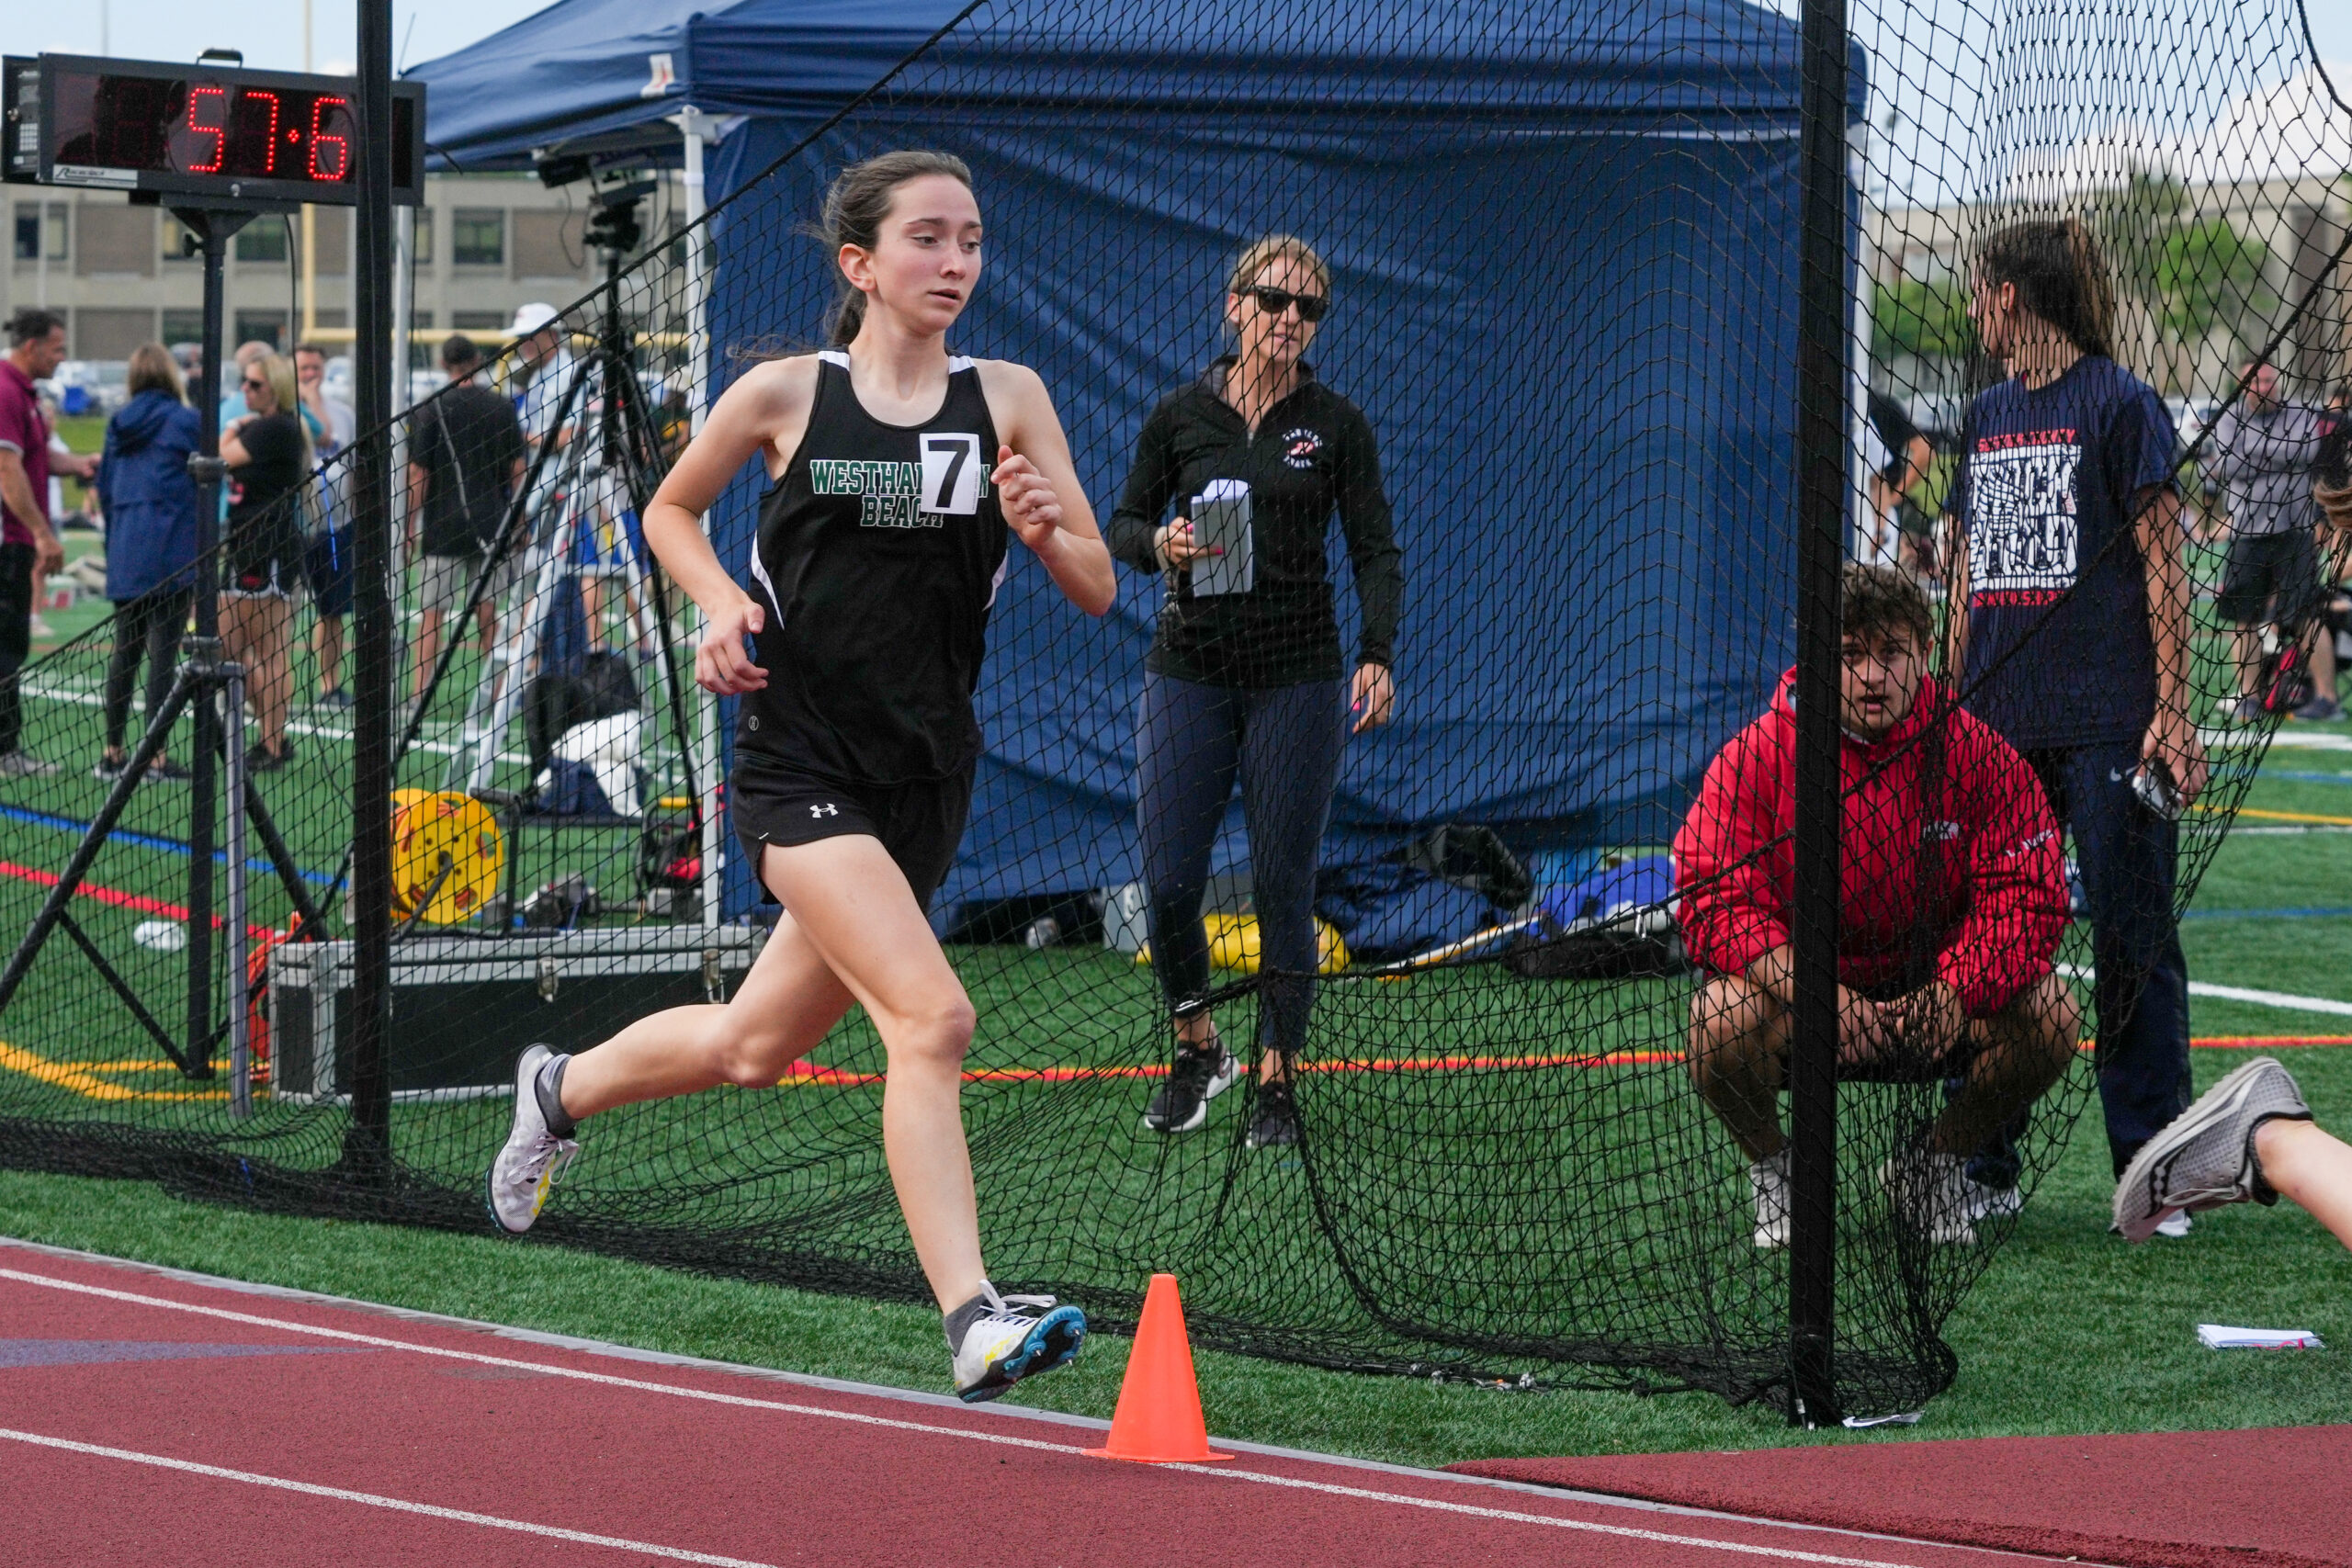 Lily Strebel races in the 1,500-meter run at the state qualifiers. RON ESPOSITO